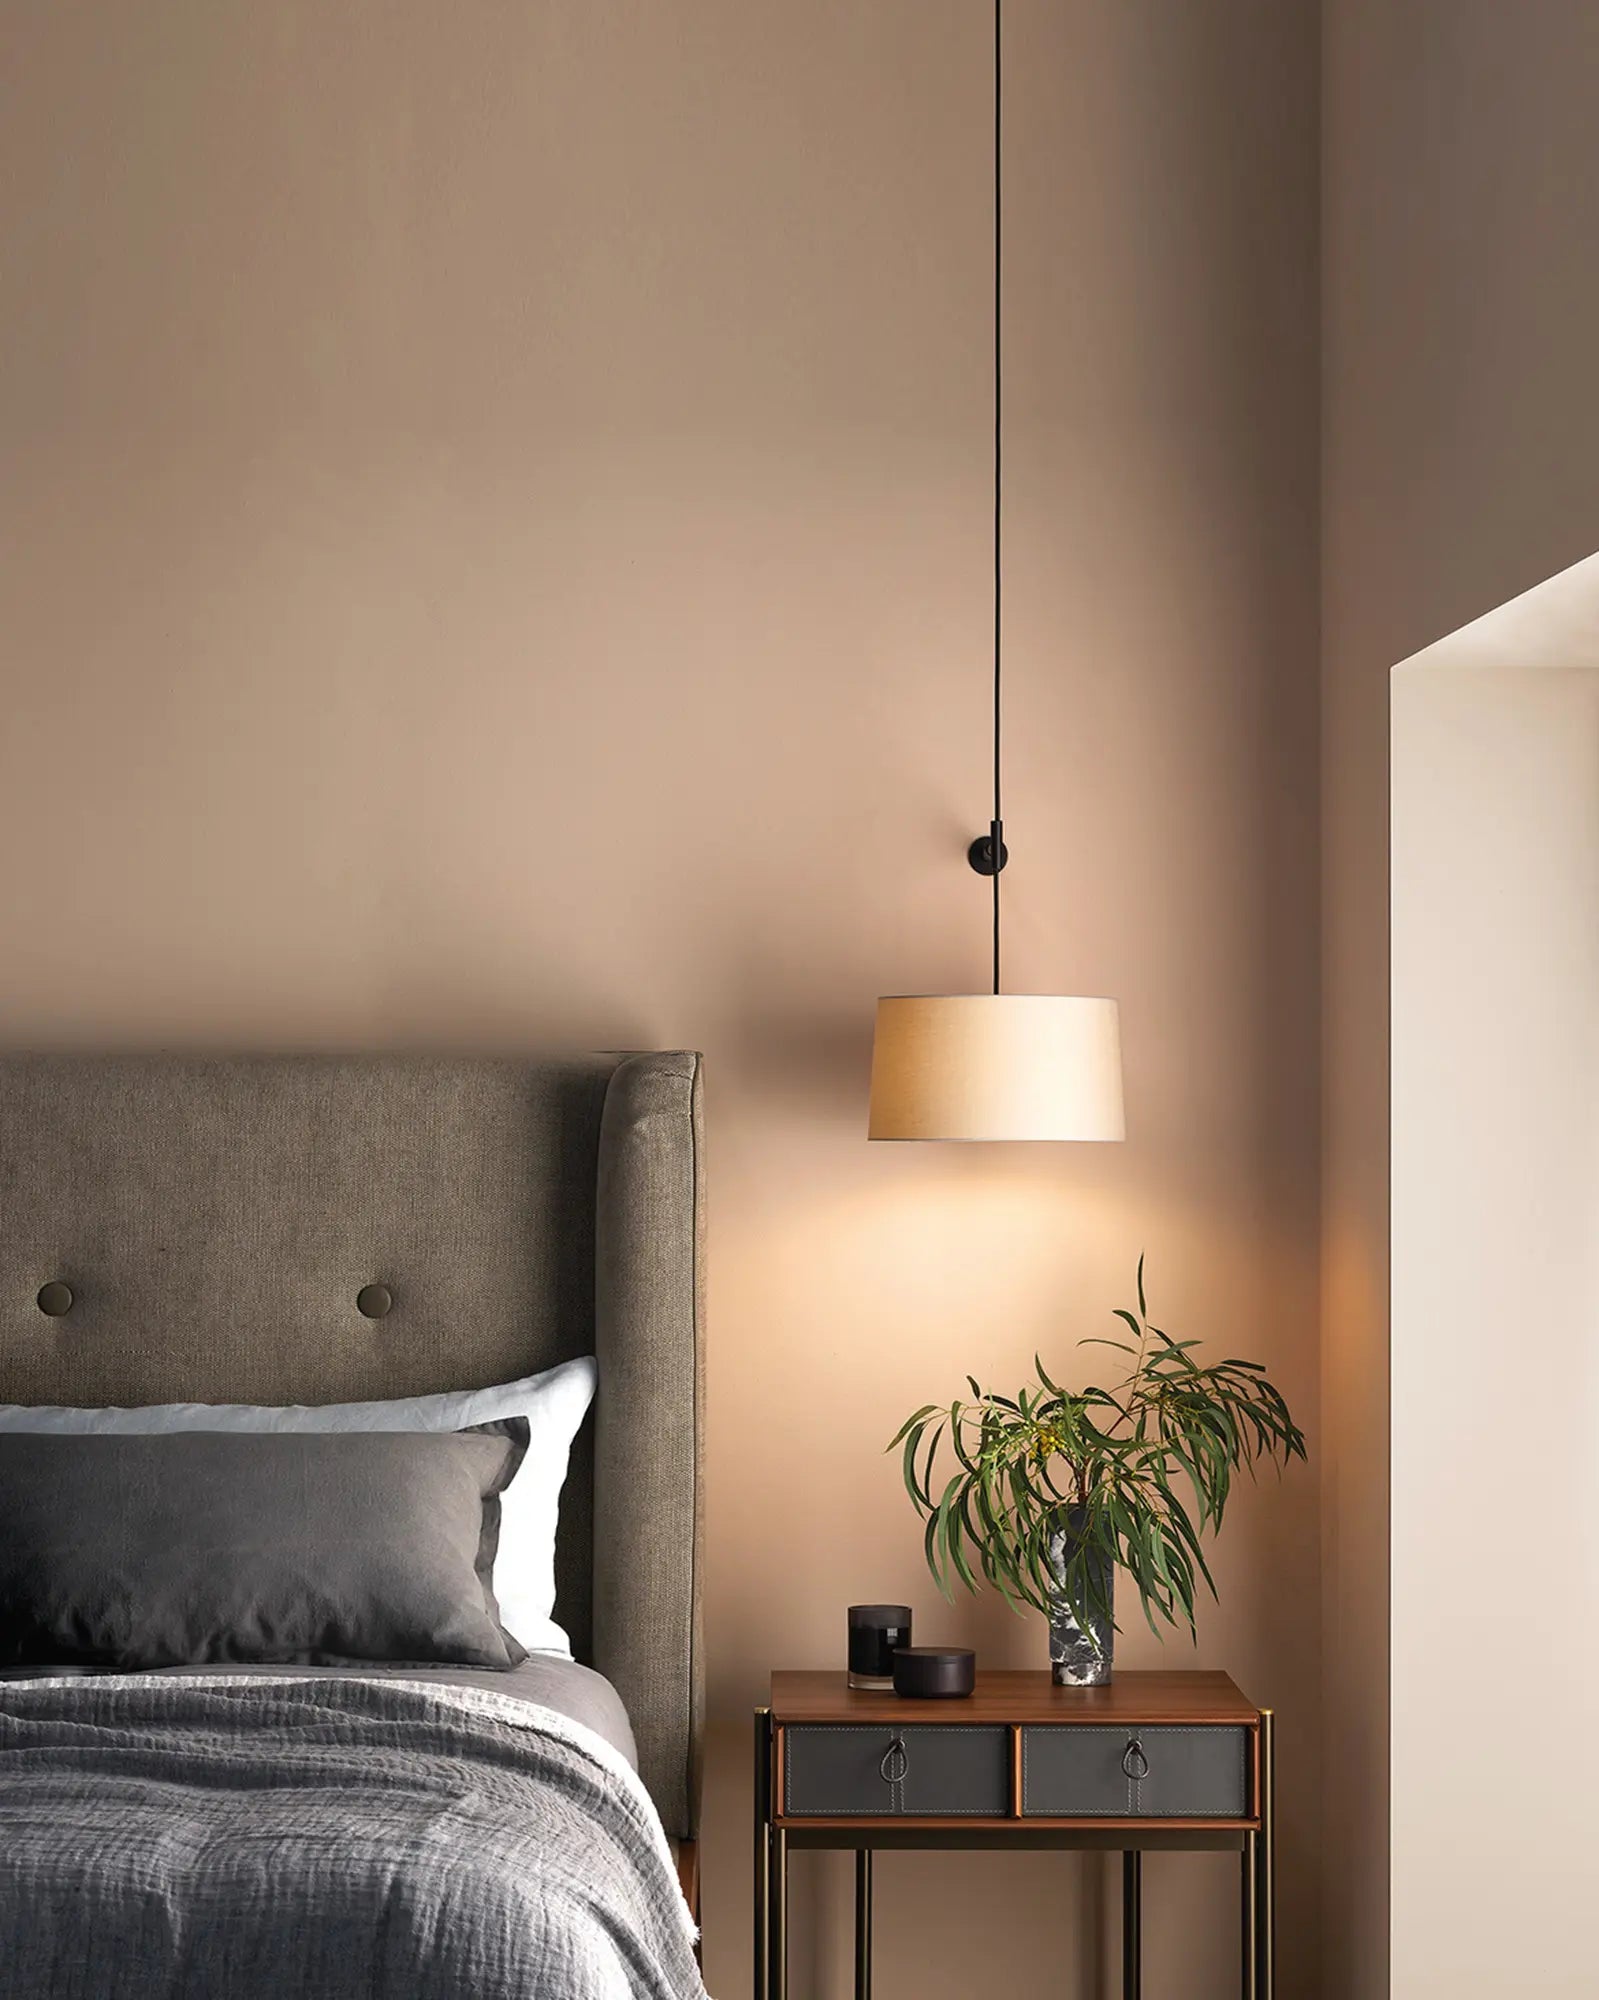 Kit pendant light with tapered shade